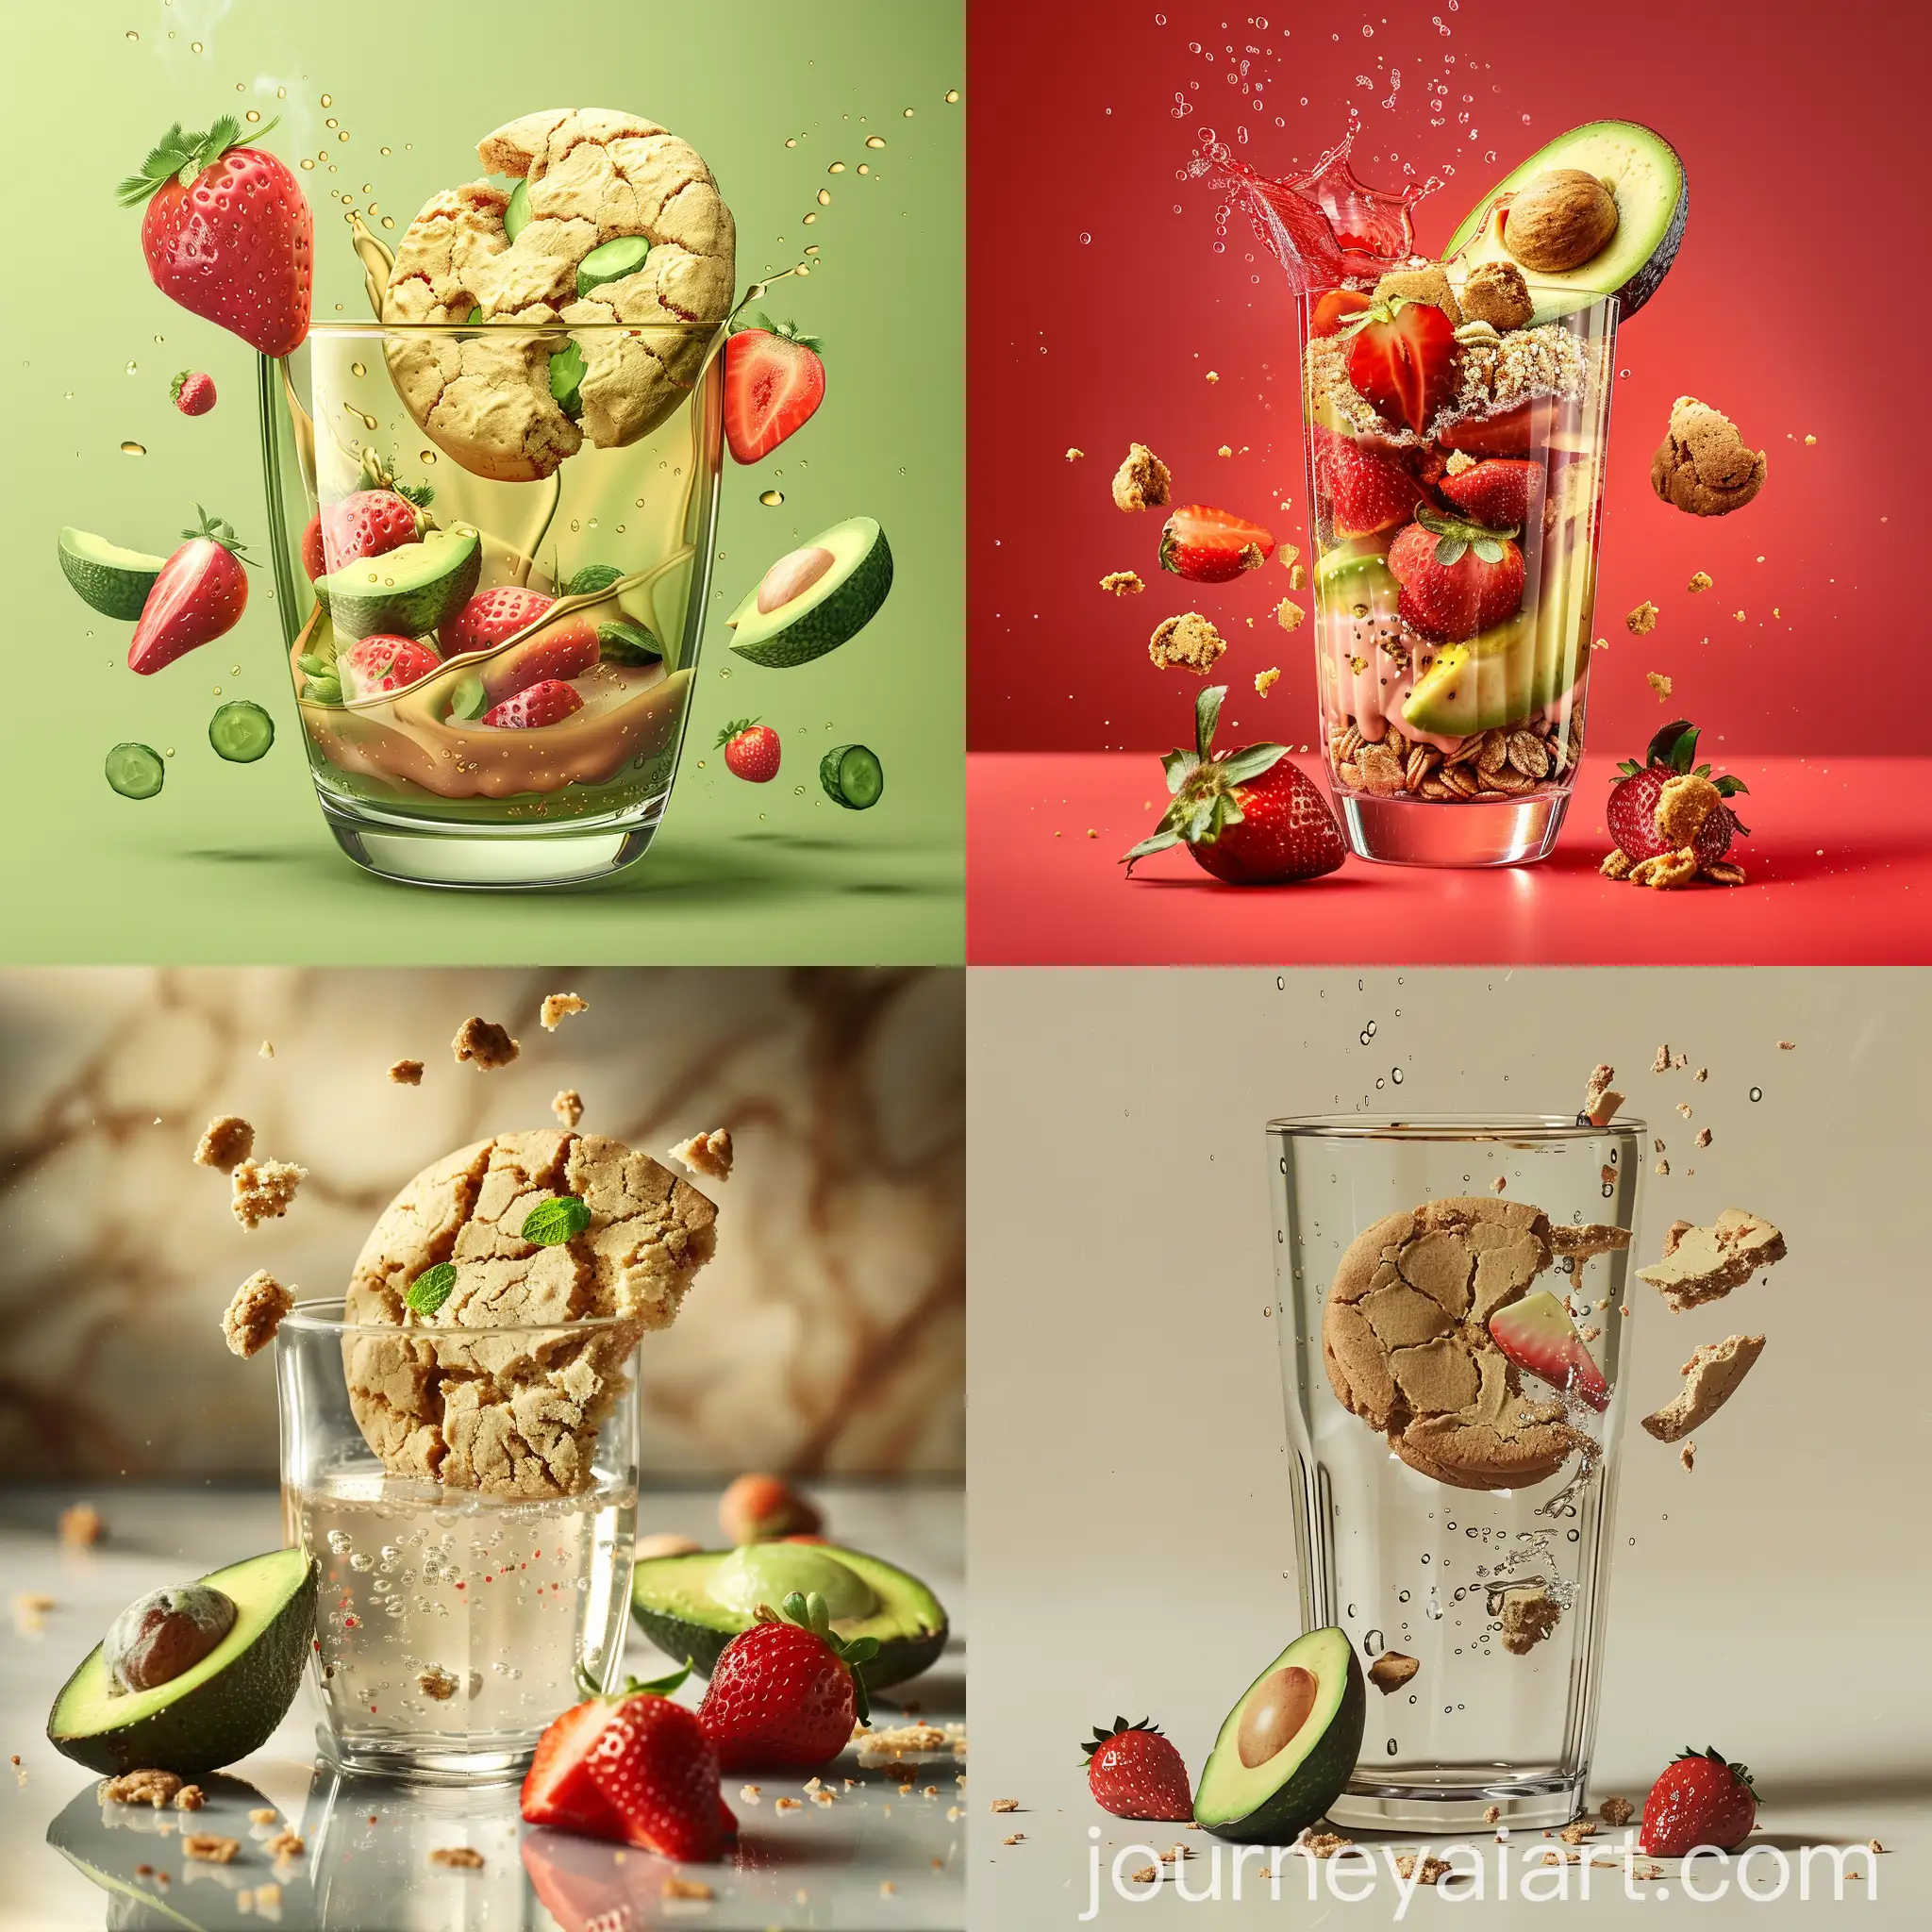 Detailed-Texture-of-HalfEaten-Cookie-in-Drinking-Glass-with-Strawberry-and-Avocado-Pieces